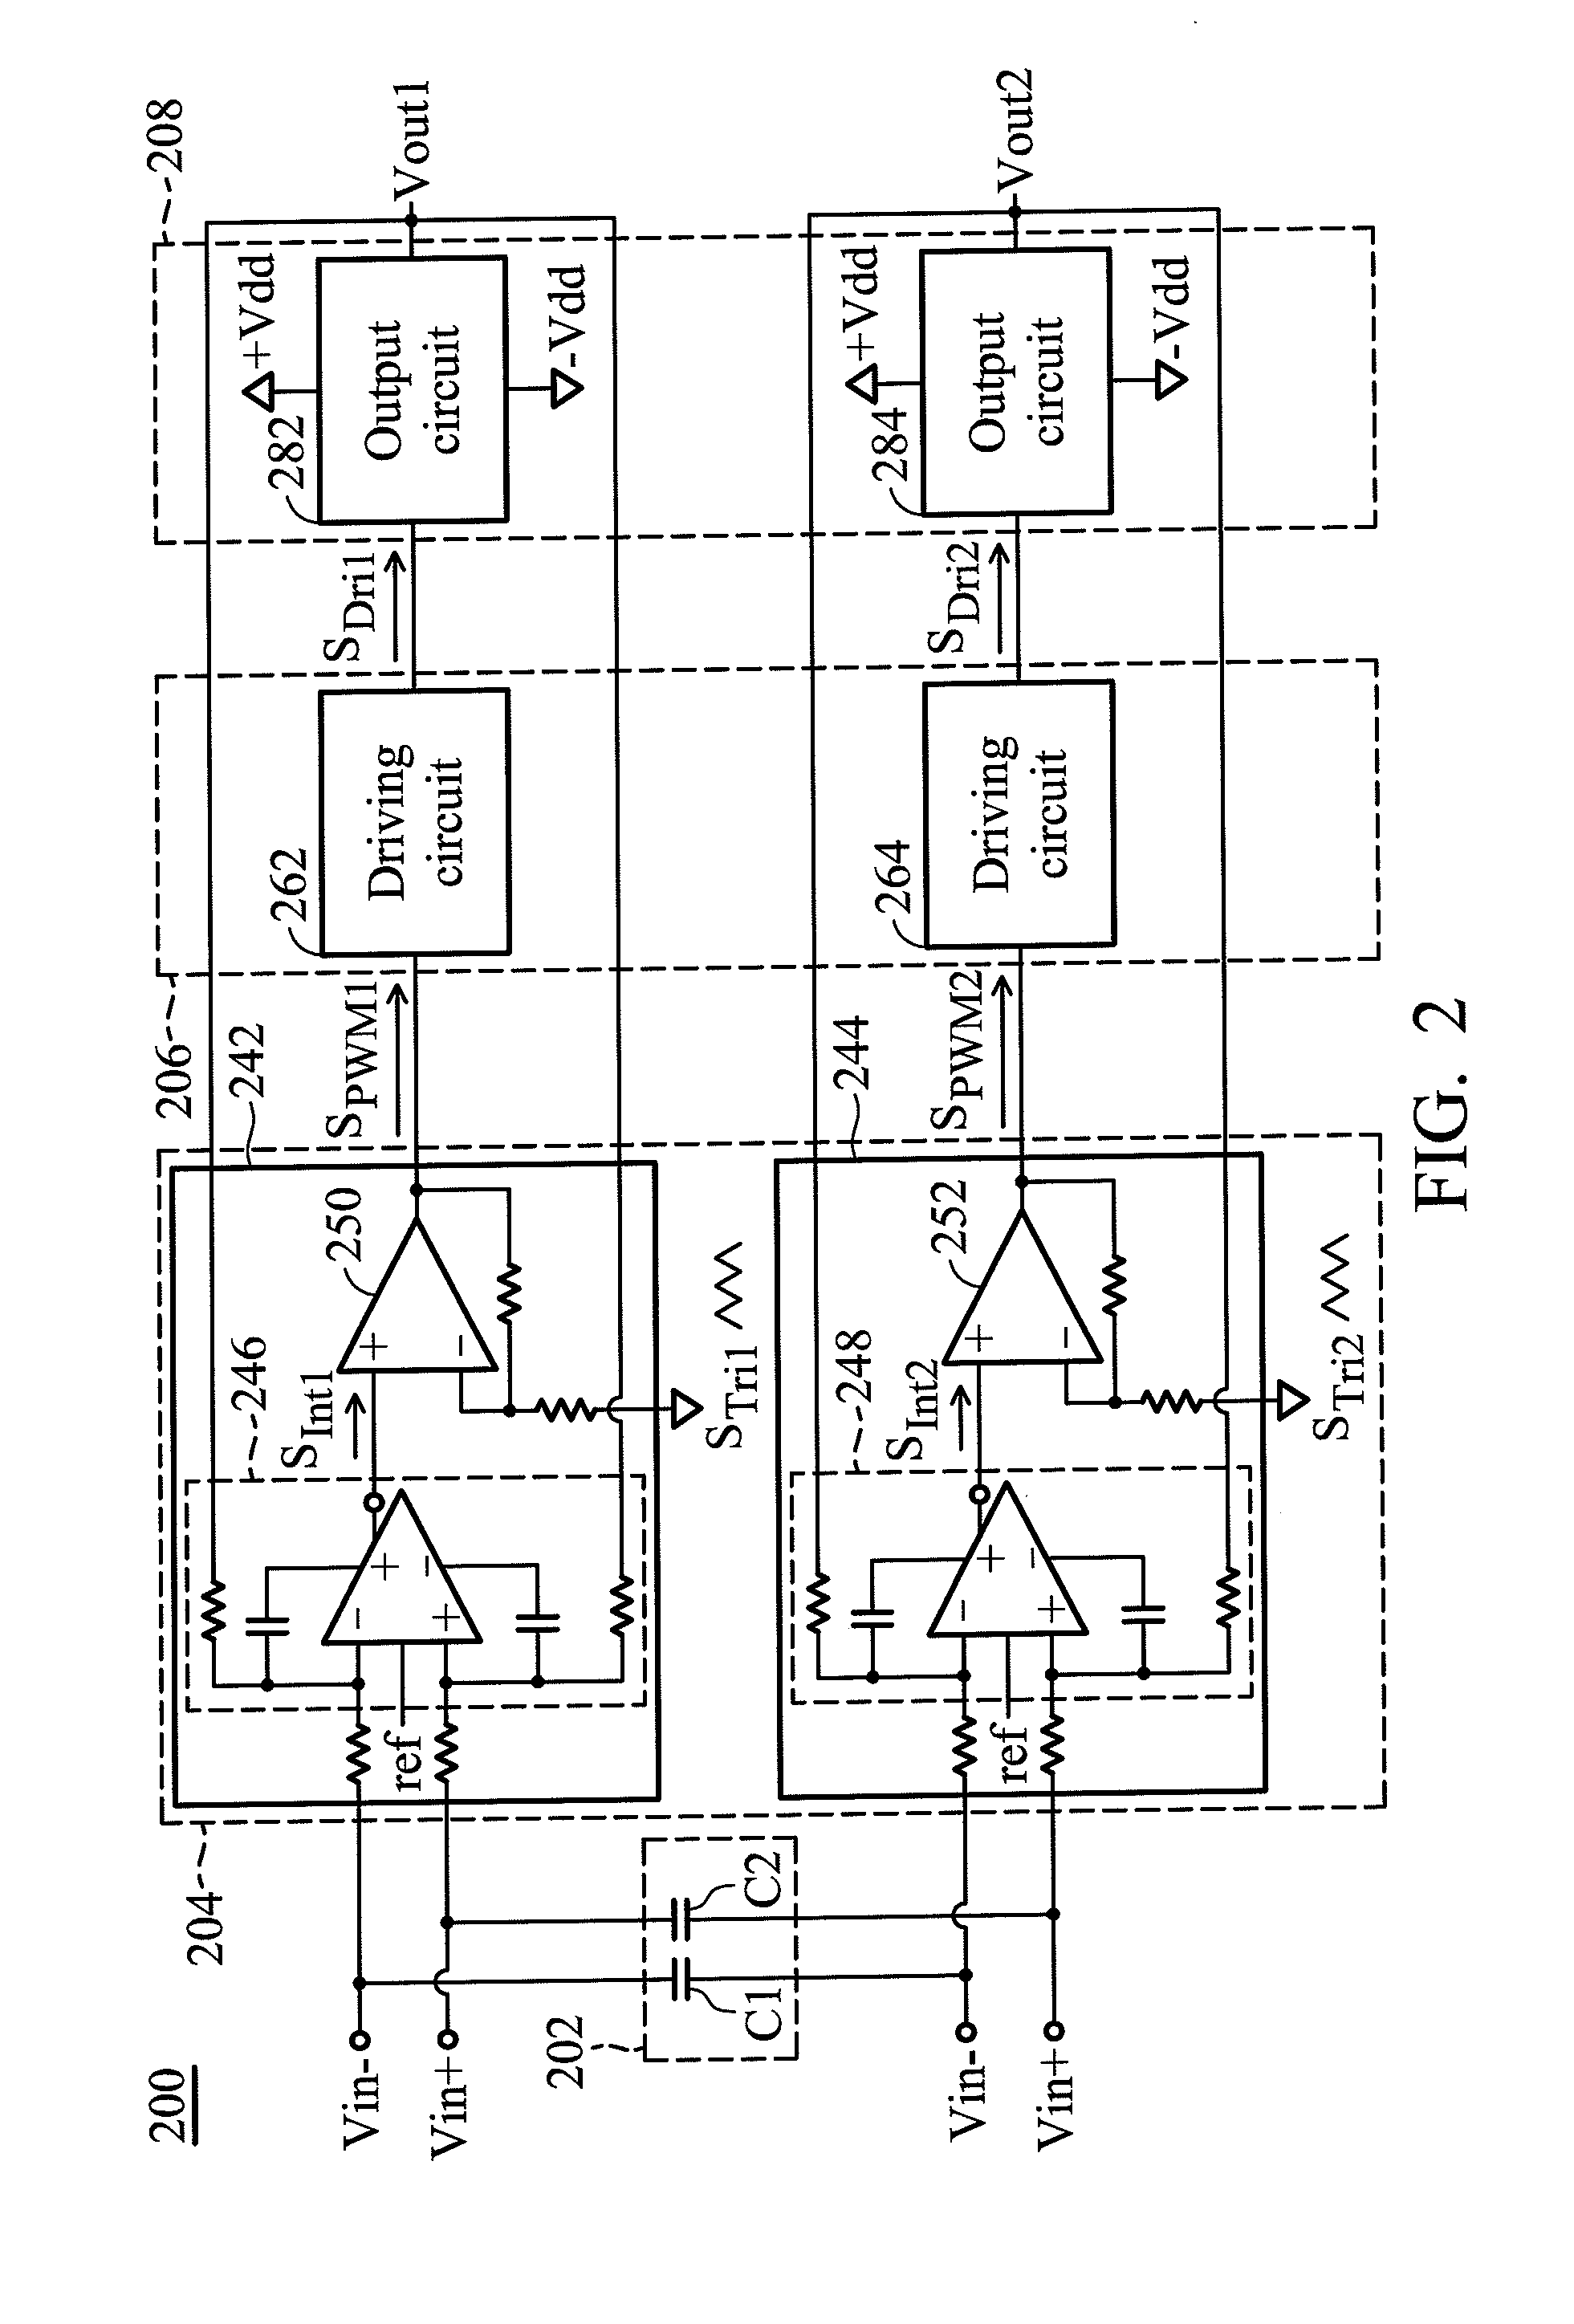 Pulse width modulation signal generating circuit and amplifier circuit with beat frequency cancellation circuit